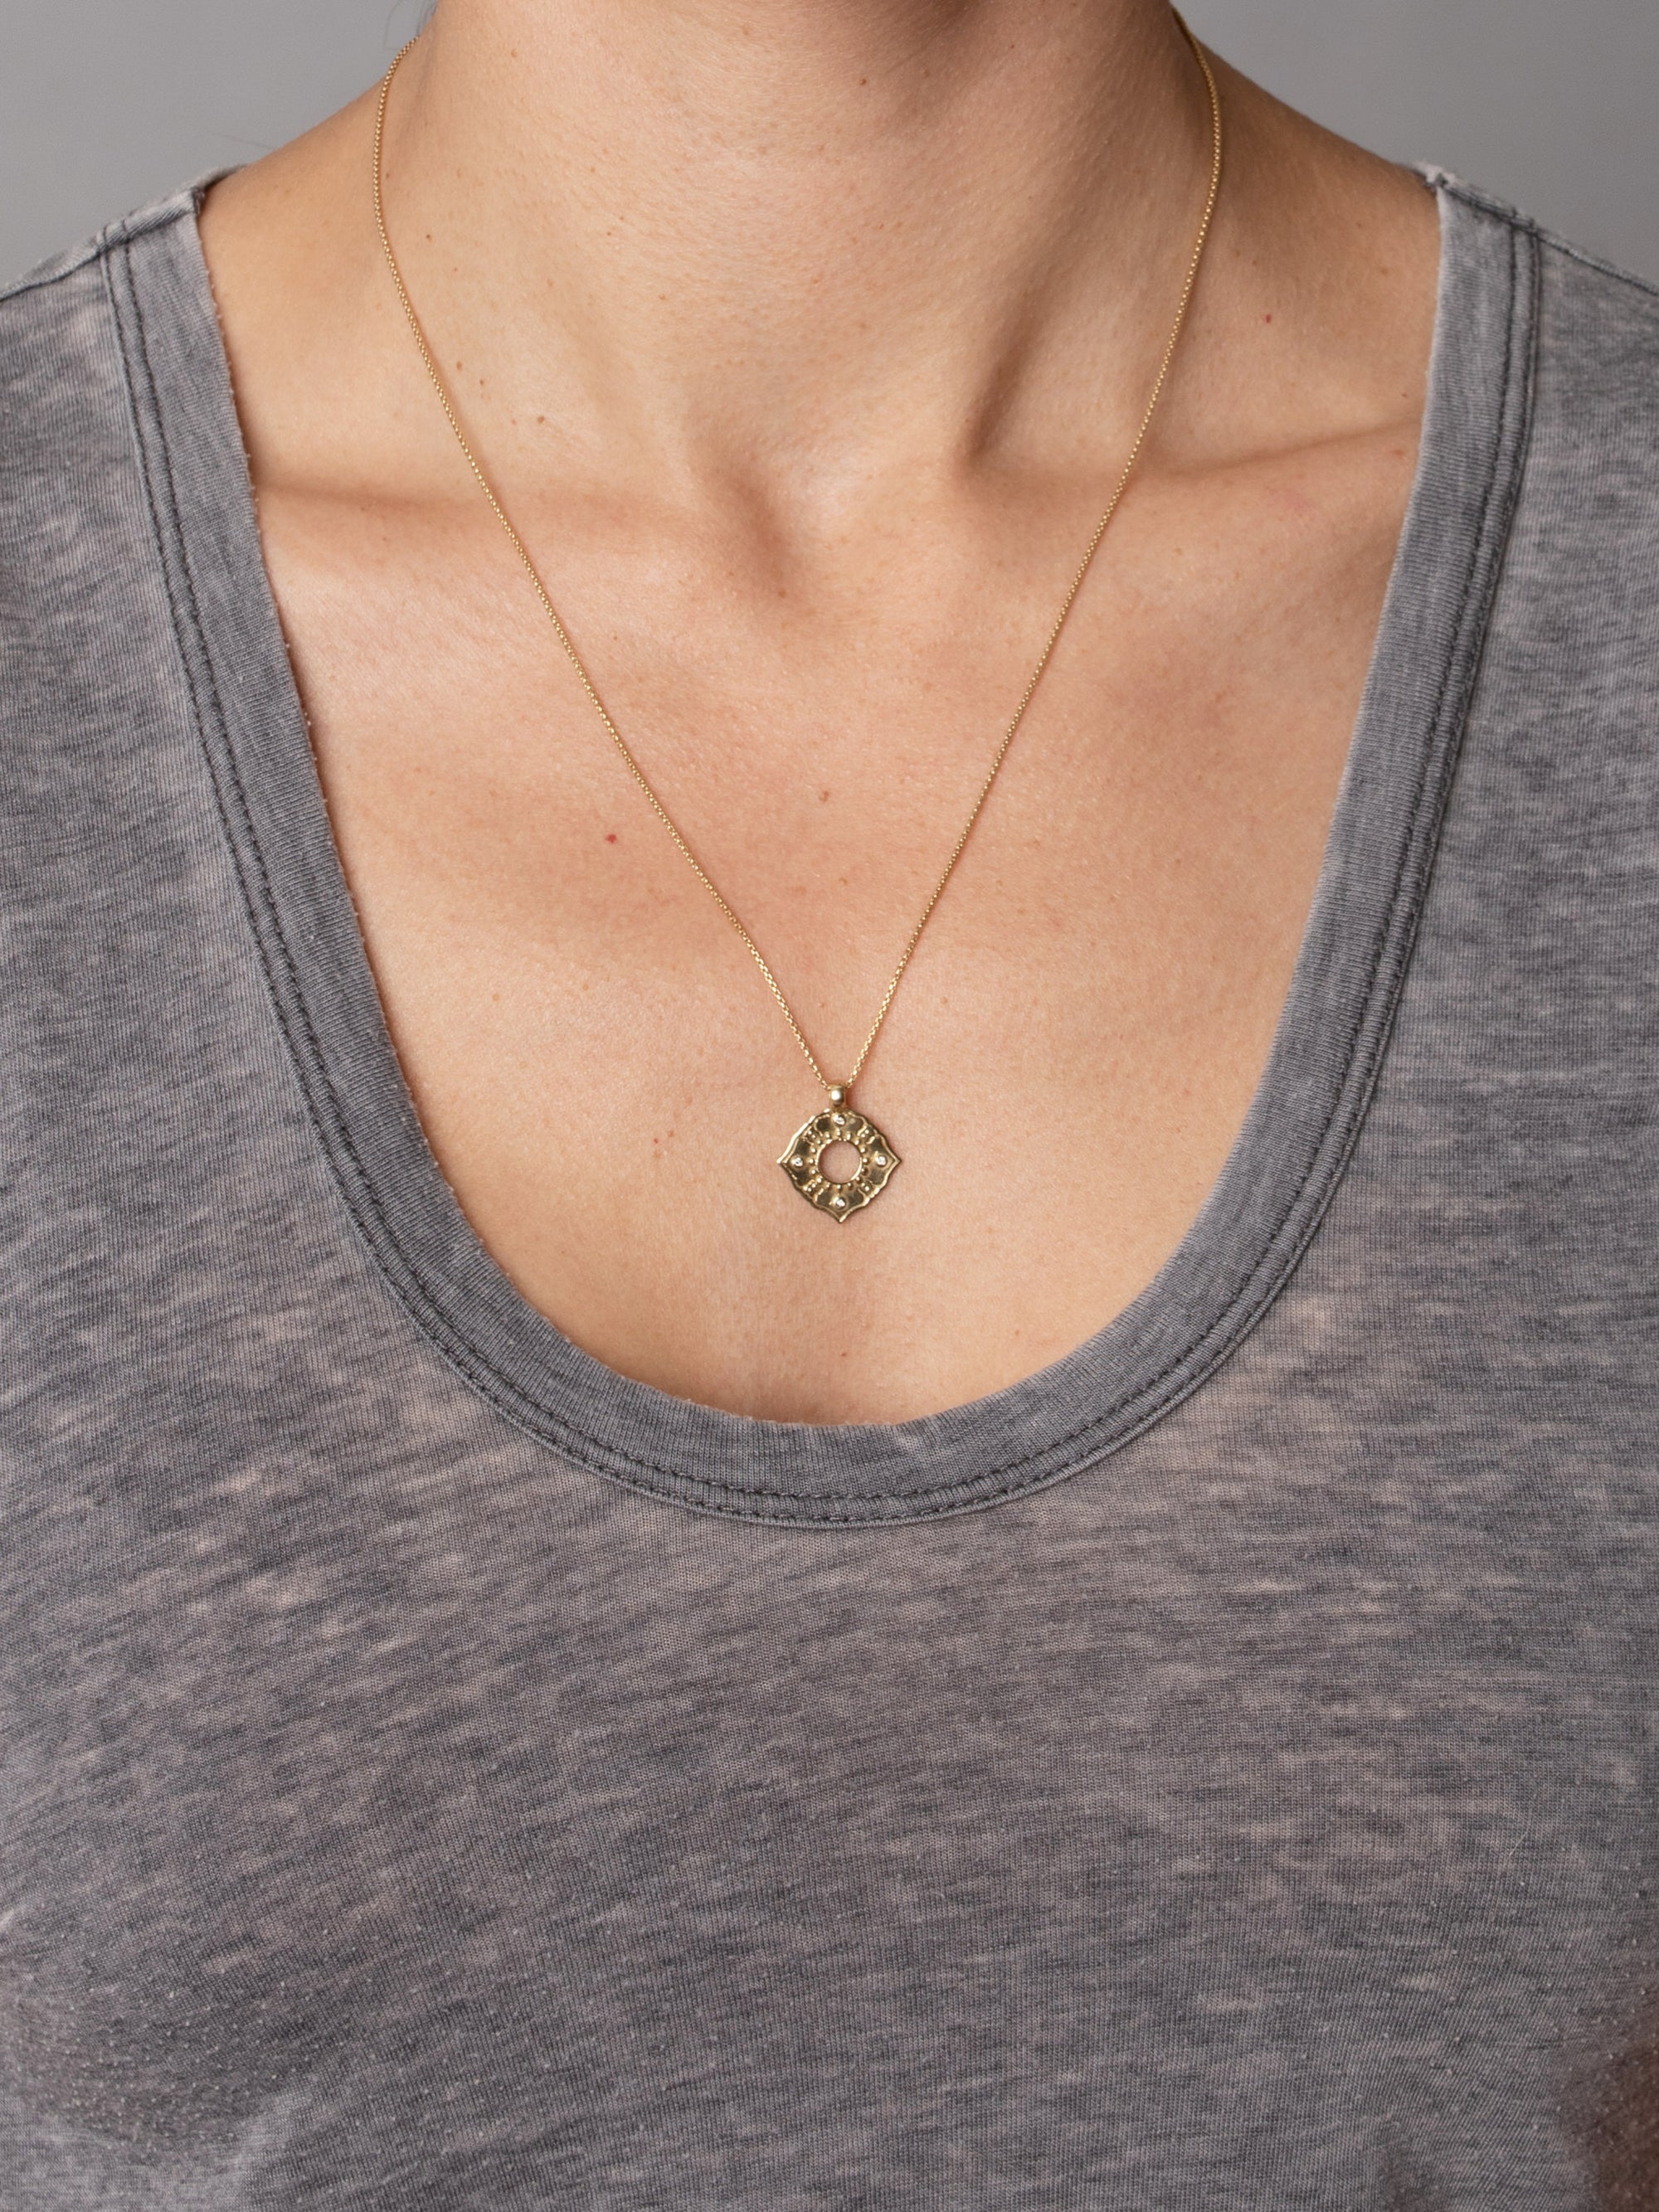 Anahata Necklace "boundless heart"